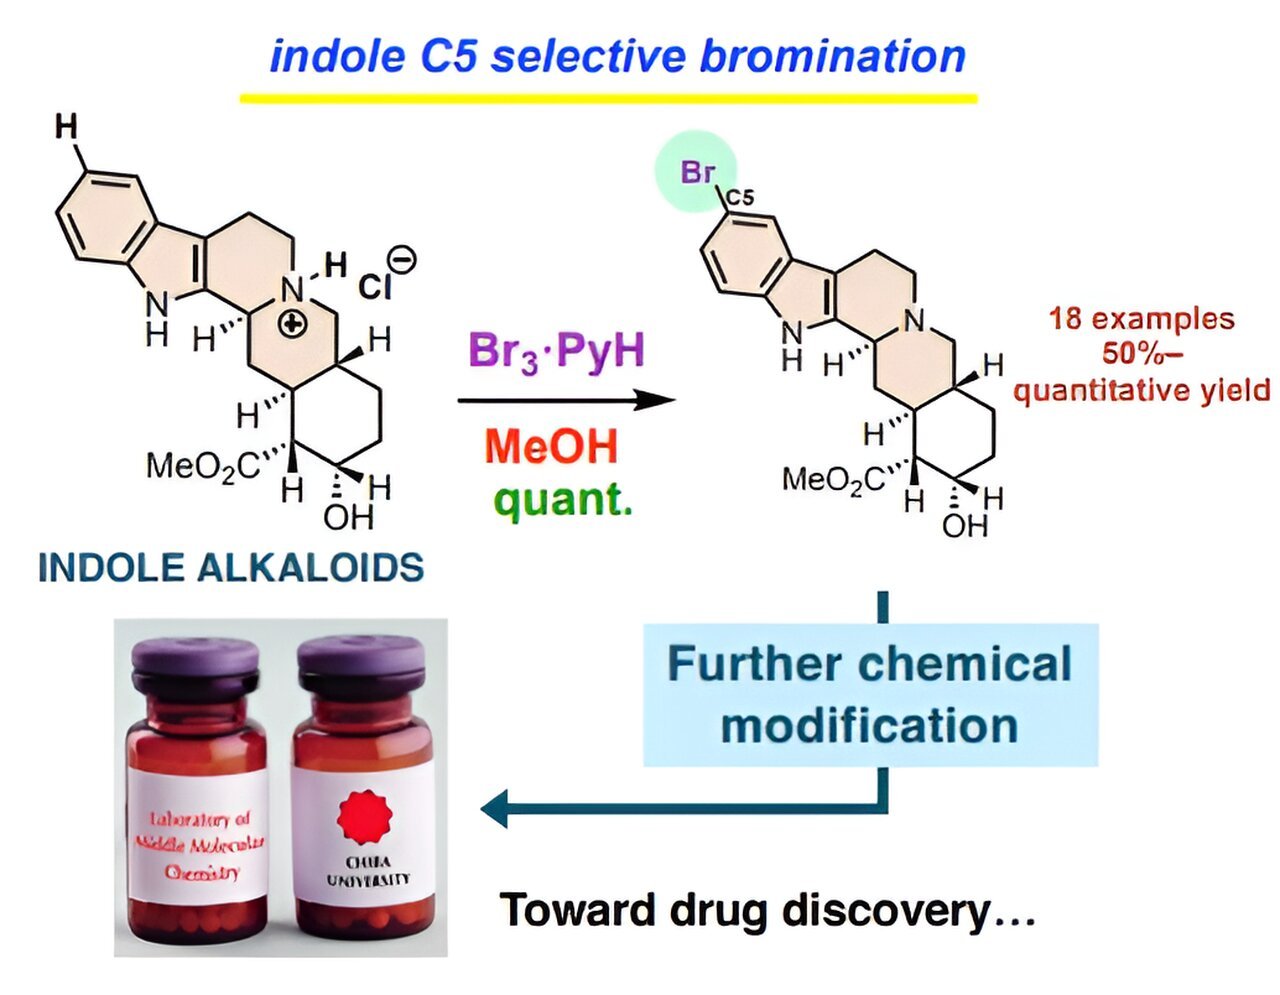 A simple, fast, and versatile method for selective bromination of indole alkaloids